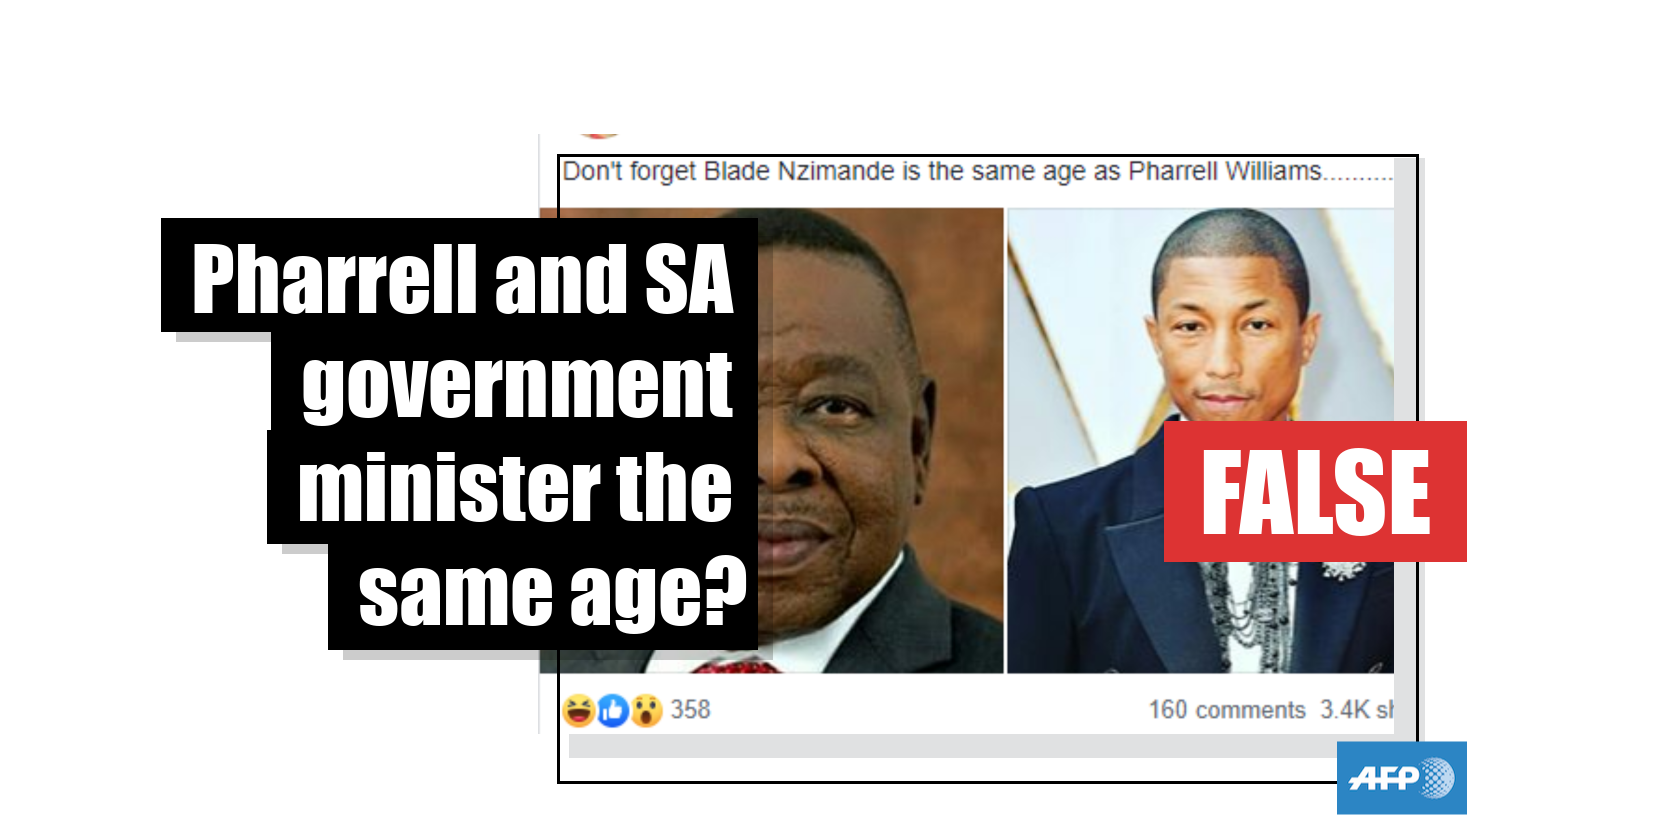 No, Pharrell Williams and Blade Nzimande are not the same age